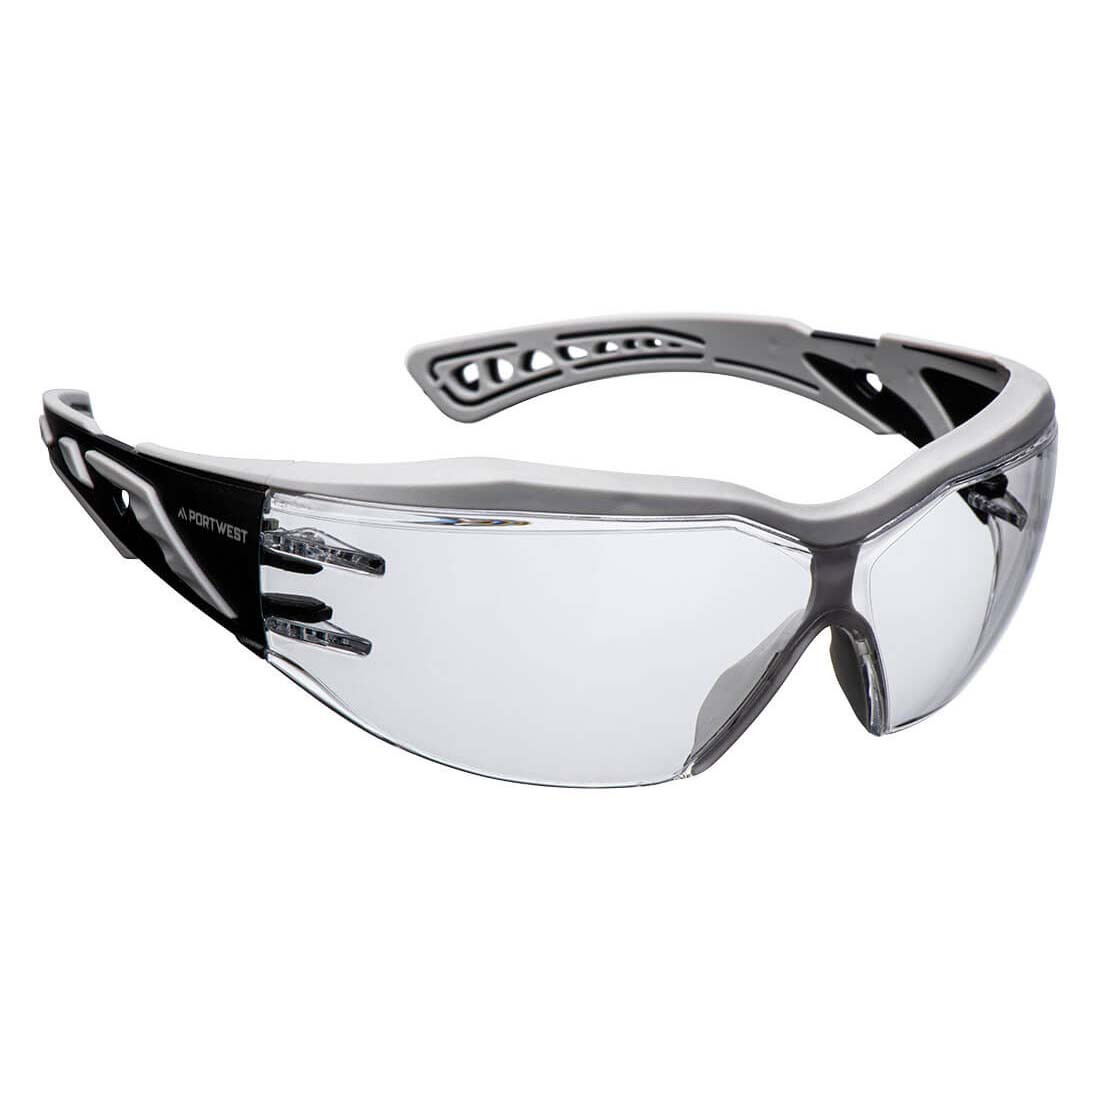 Dynamic Plus KN Safety Glasses - Personal protection